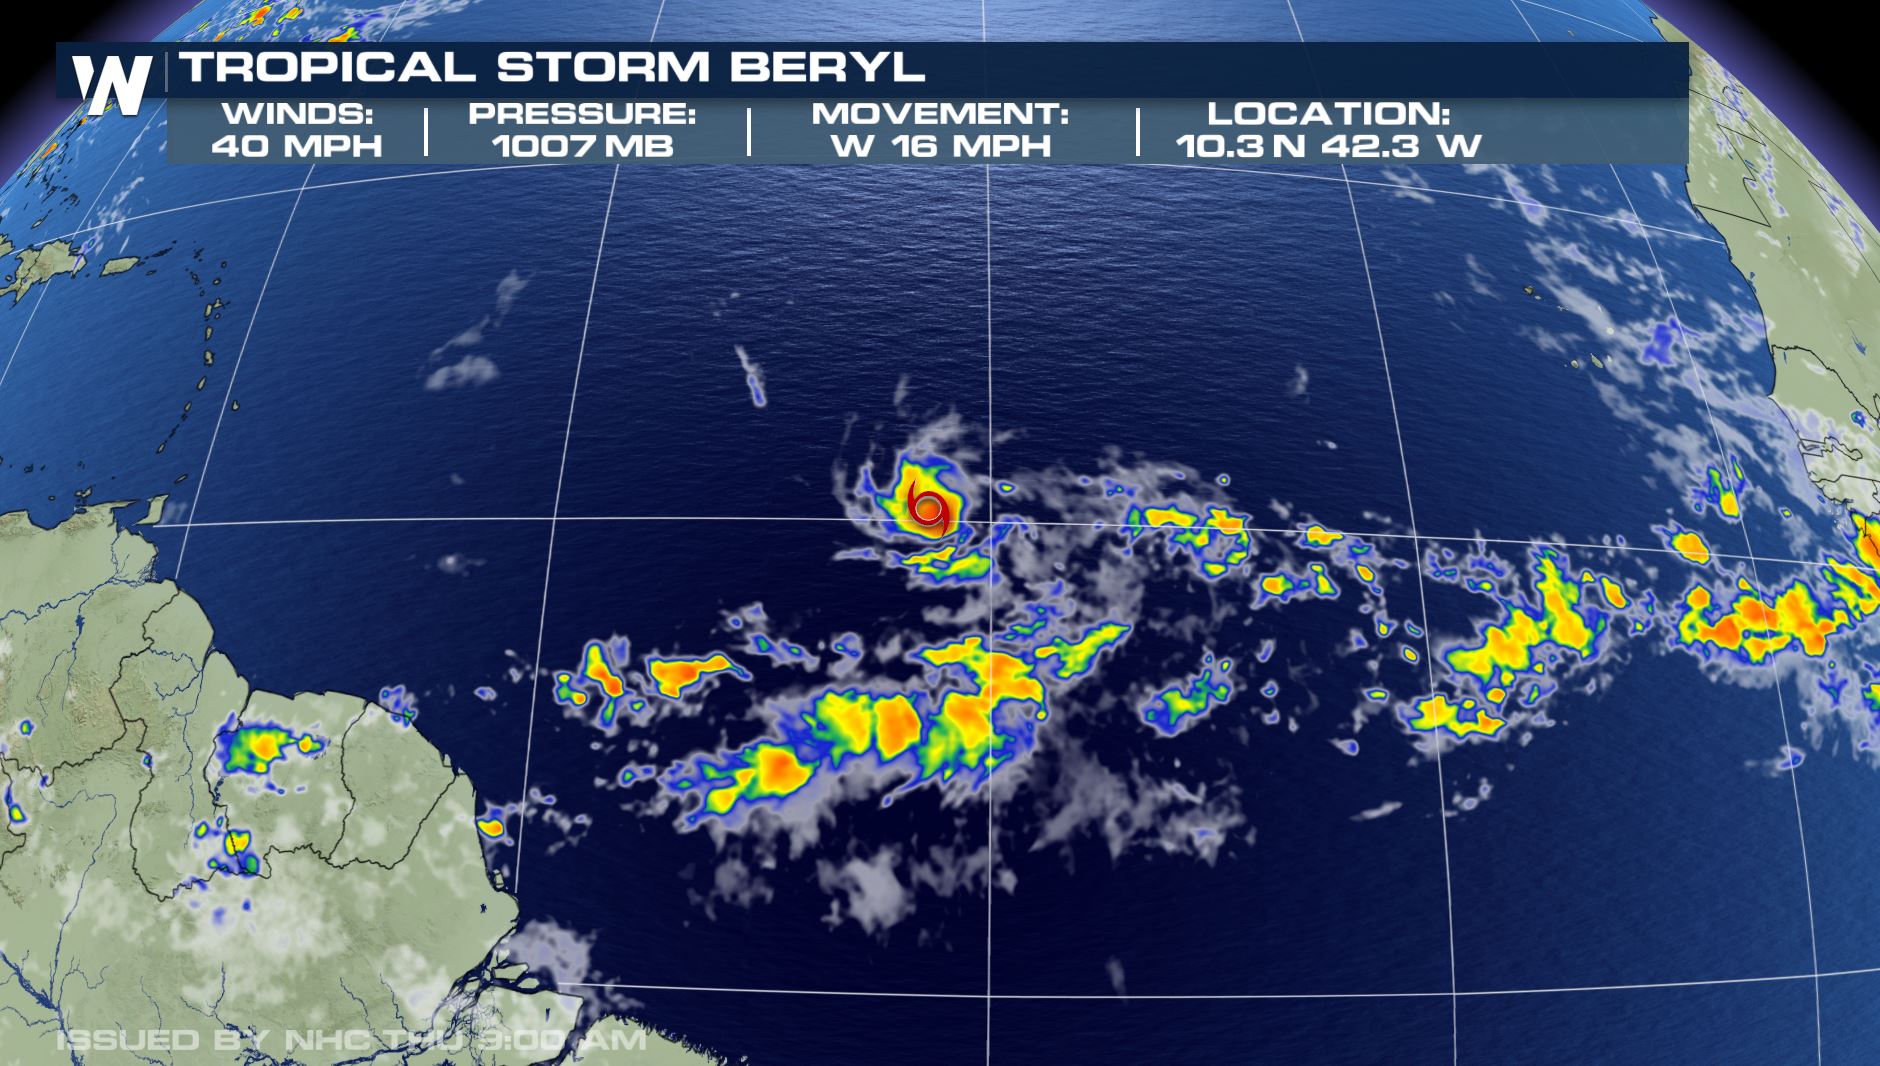 Beryl haiti hurricane forecast map rains gusty approaches tropical storm heavy winds expected